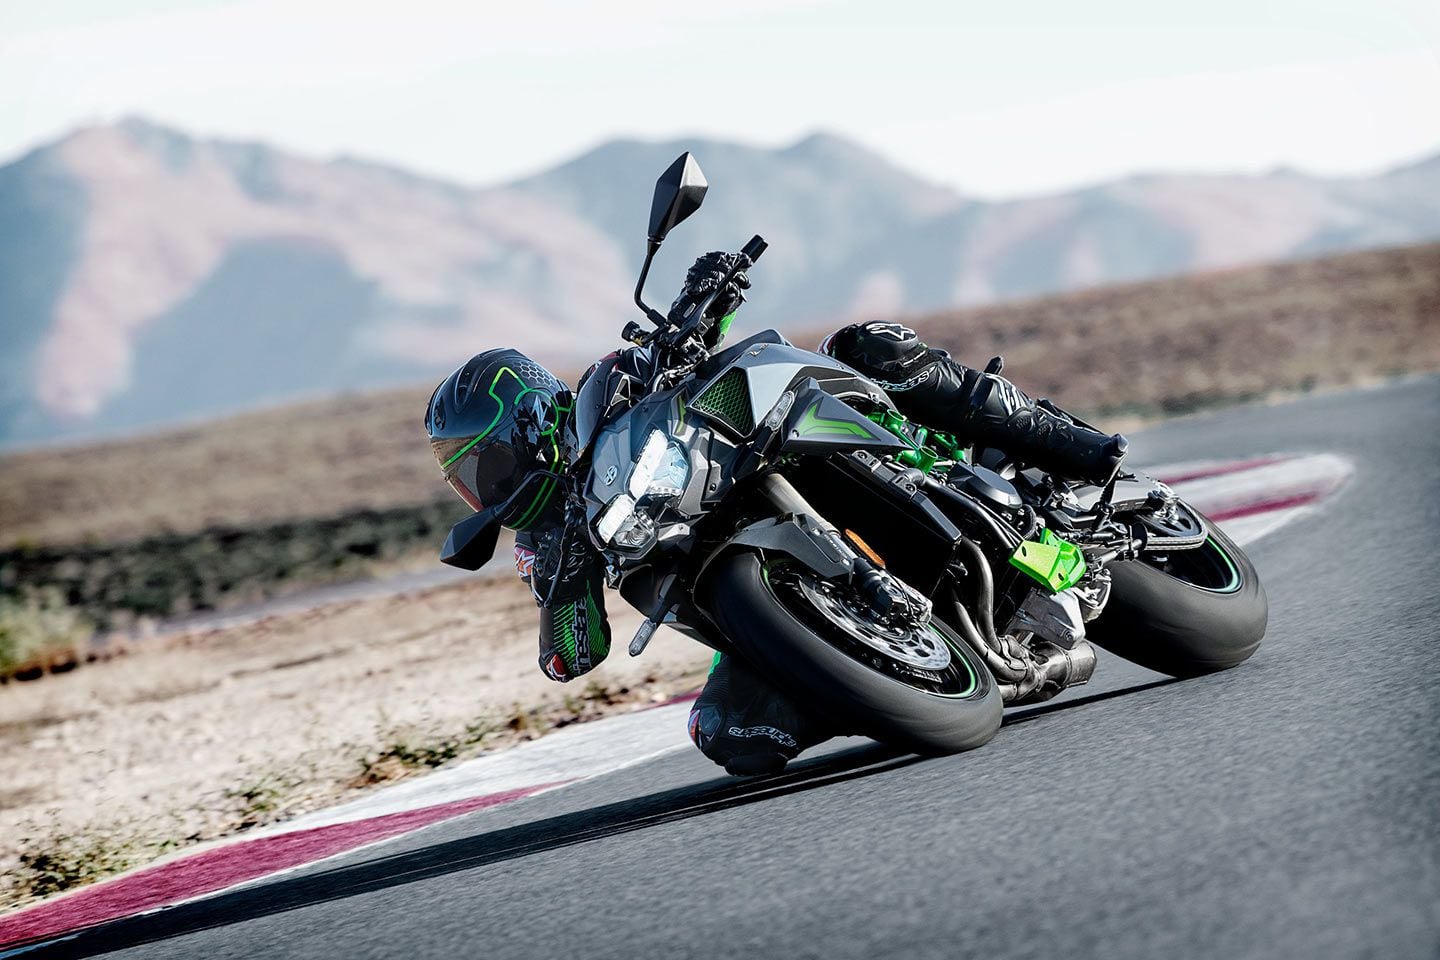 For a conversation-starting engine and aesthetic, along with unending power, consider the Kawasaki Z H2 SE ABS.